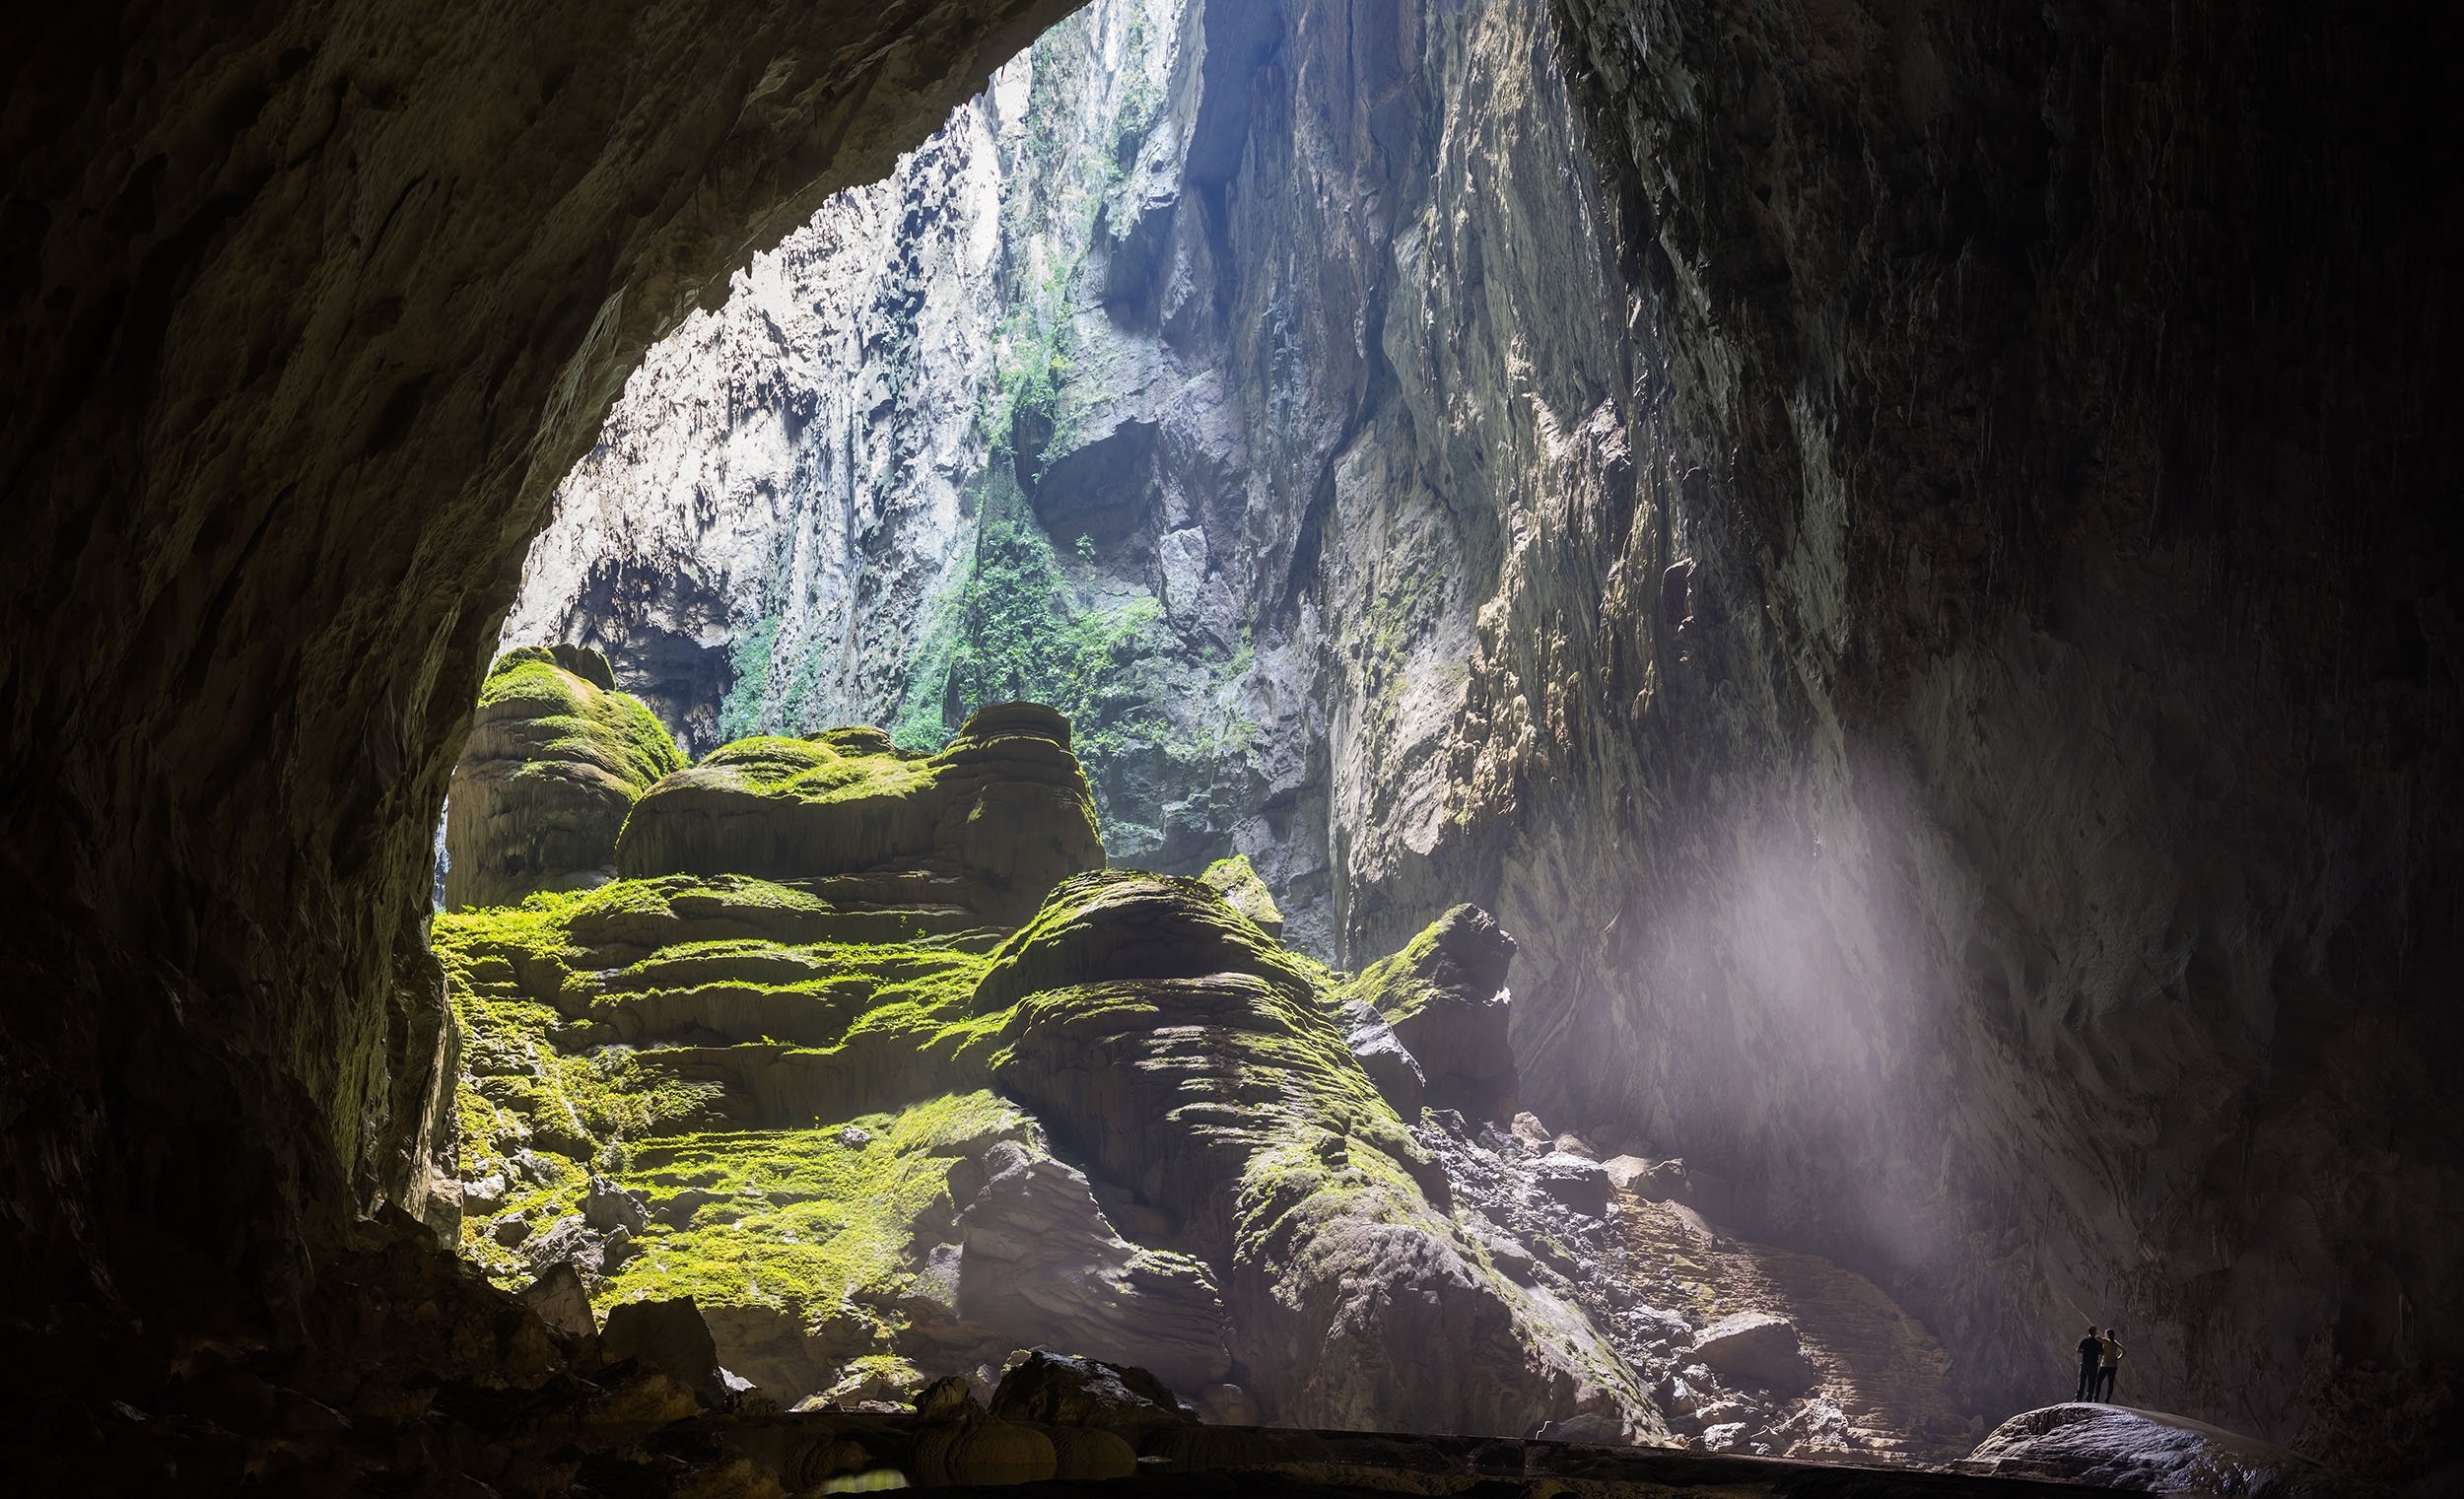 Sun shines through the entrance of the Son Doong Cave in the Phong Nha-Ke Bang National Park, which is a UNESCO World Heritage Site in the Quang Binh province, Vietnam. (Shutterstock Photo)